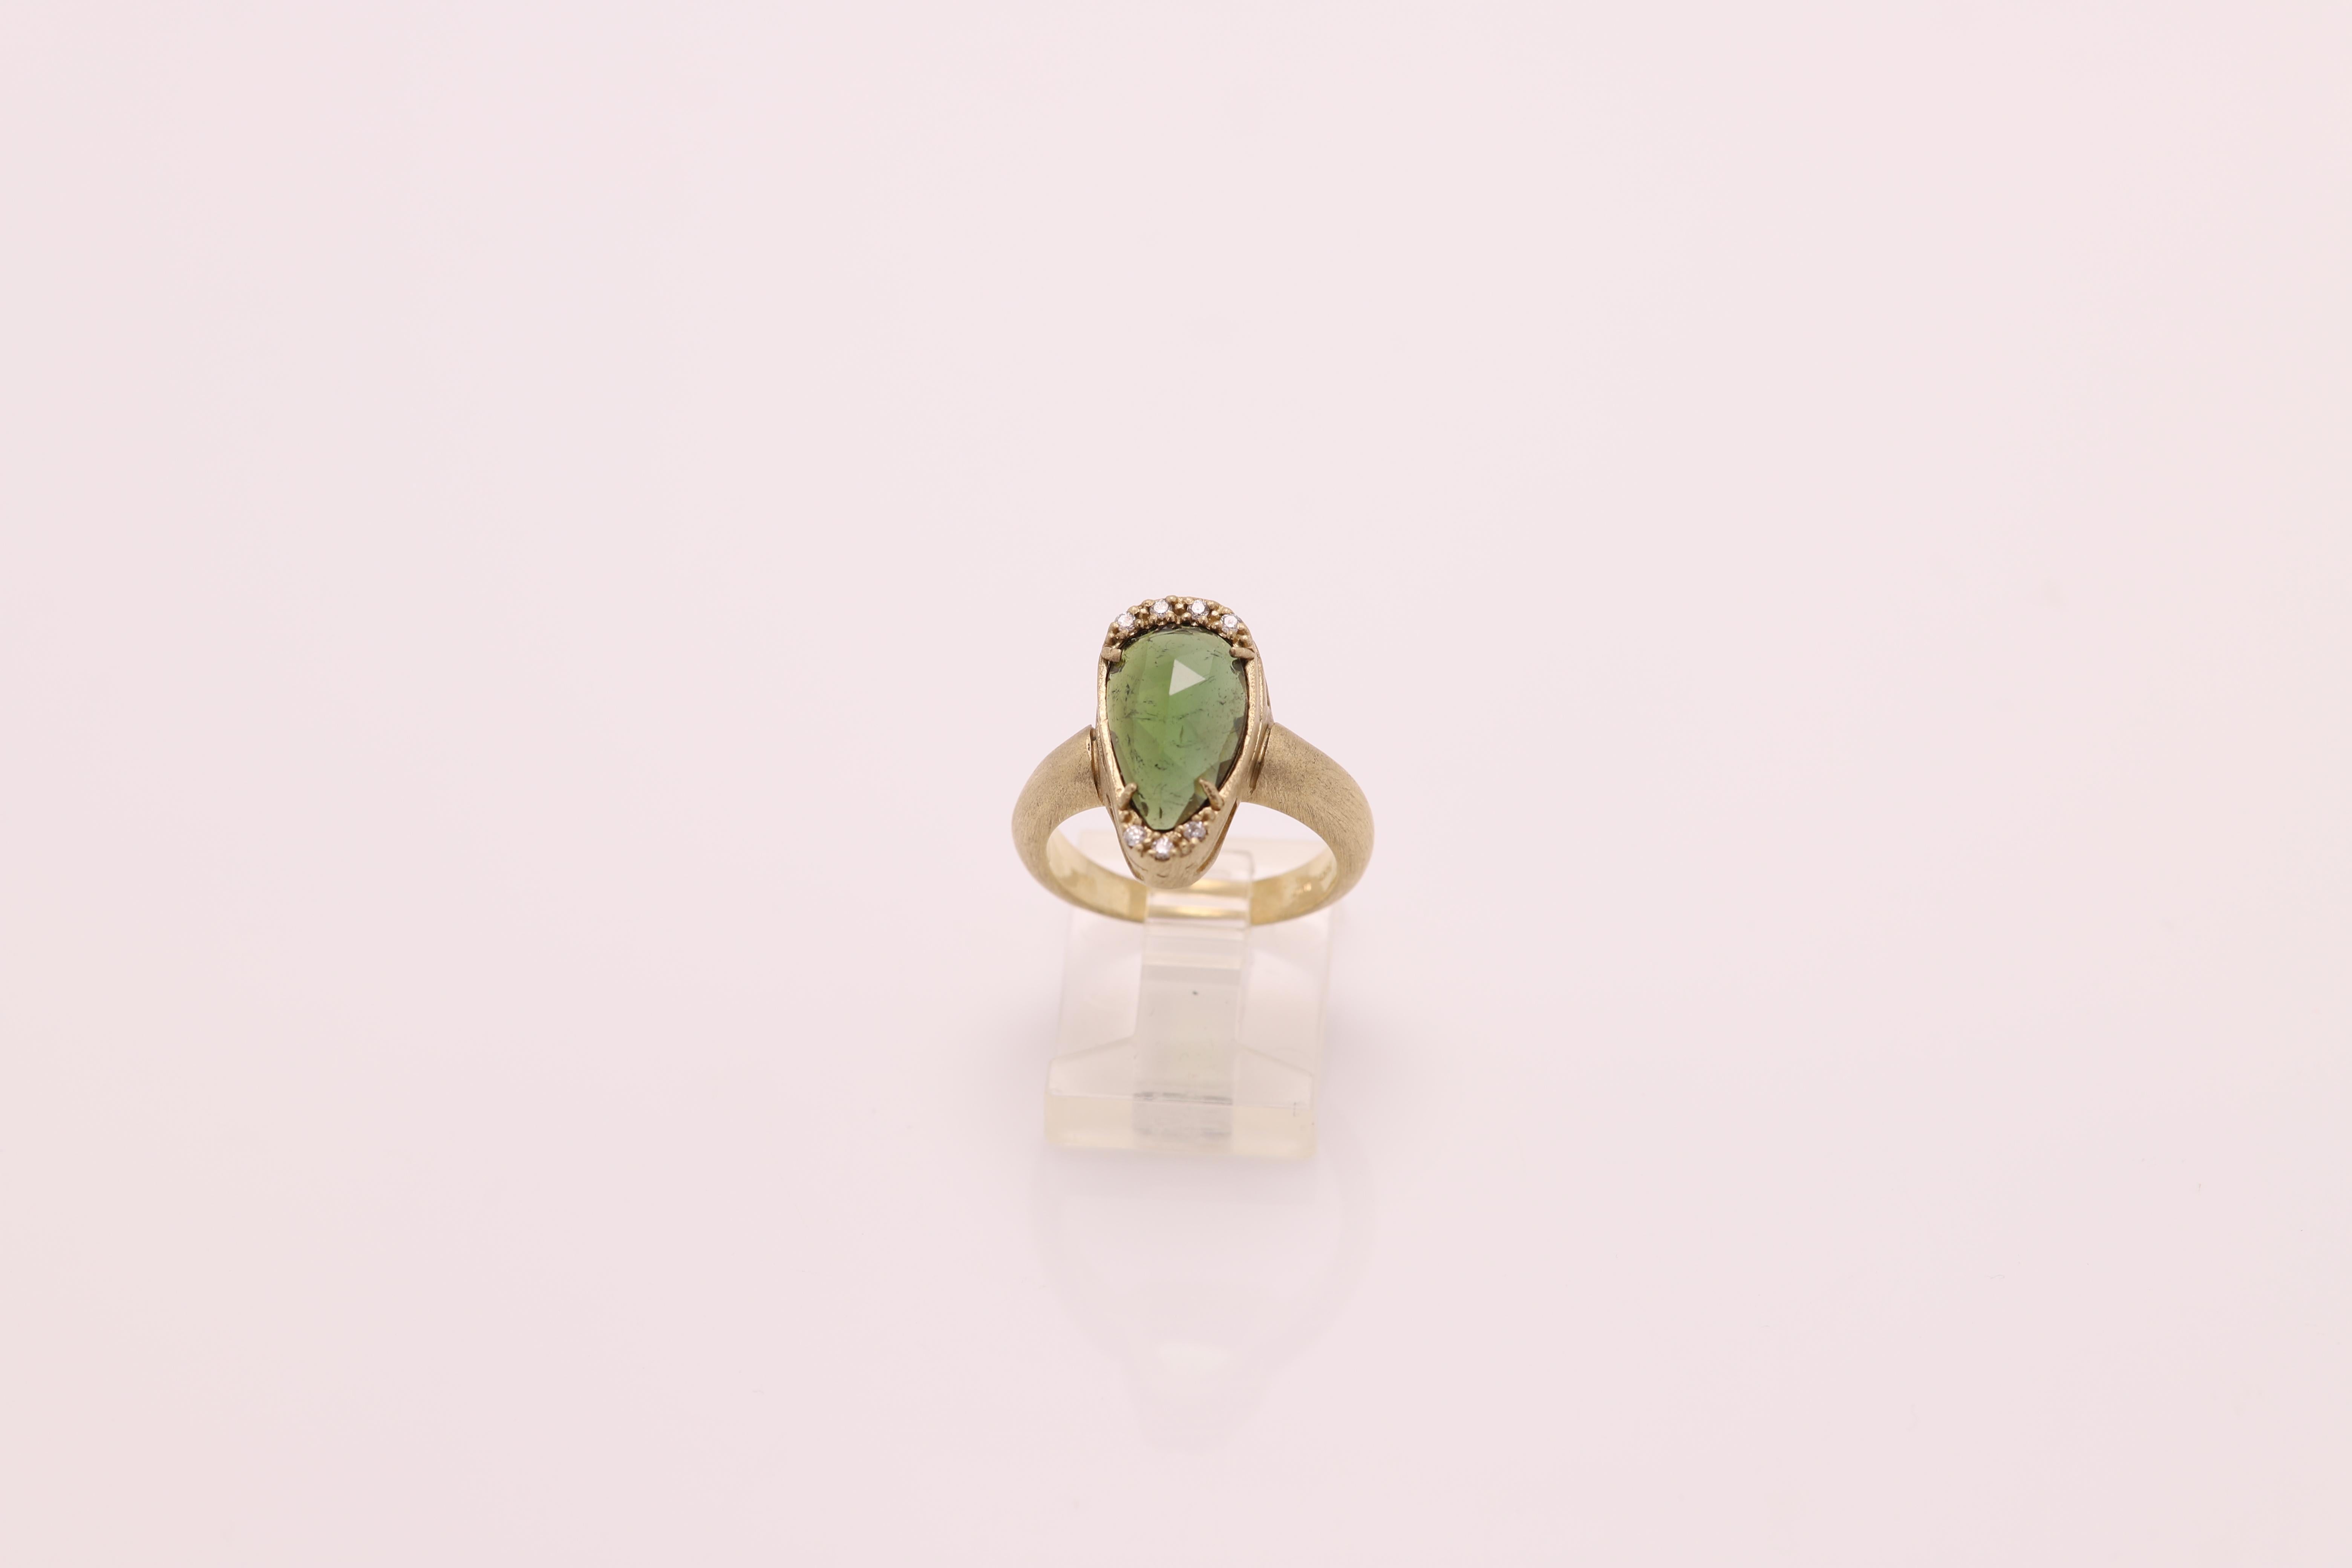 Vintage Green Tourmaline Ring - Hand Made in Italy
14k Yellow Gold 7.7 grams - mat finish (not shiny)
Few Small Round Diamonds
Center is a 